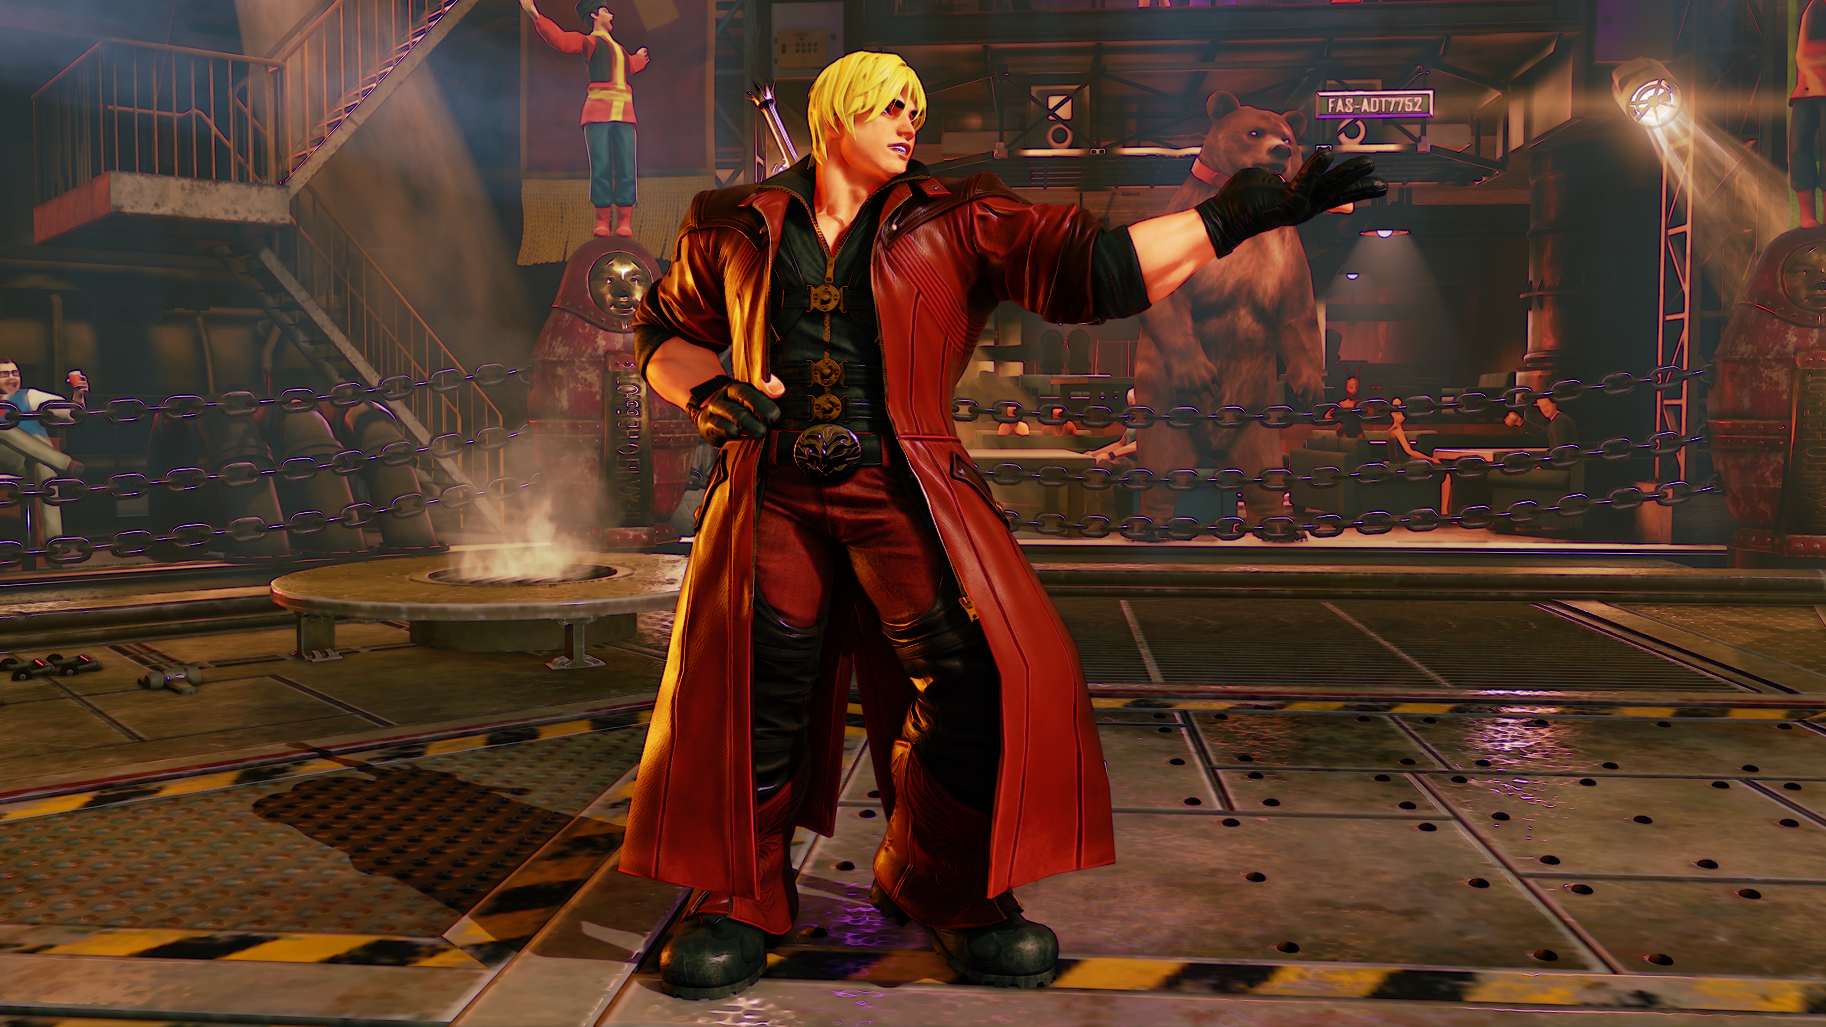 Image for Street Fighter 5's next update adds a new character, Devil May Cry and Mega Man costumes, improved survival and loot boxes